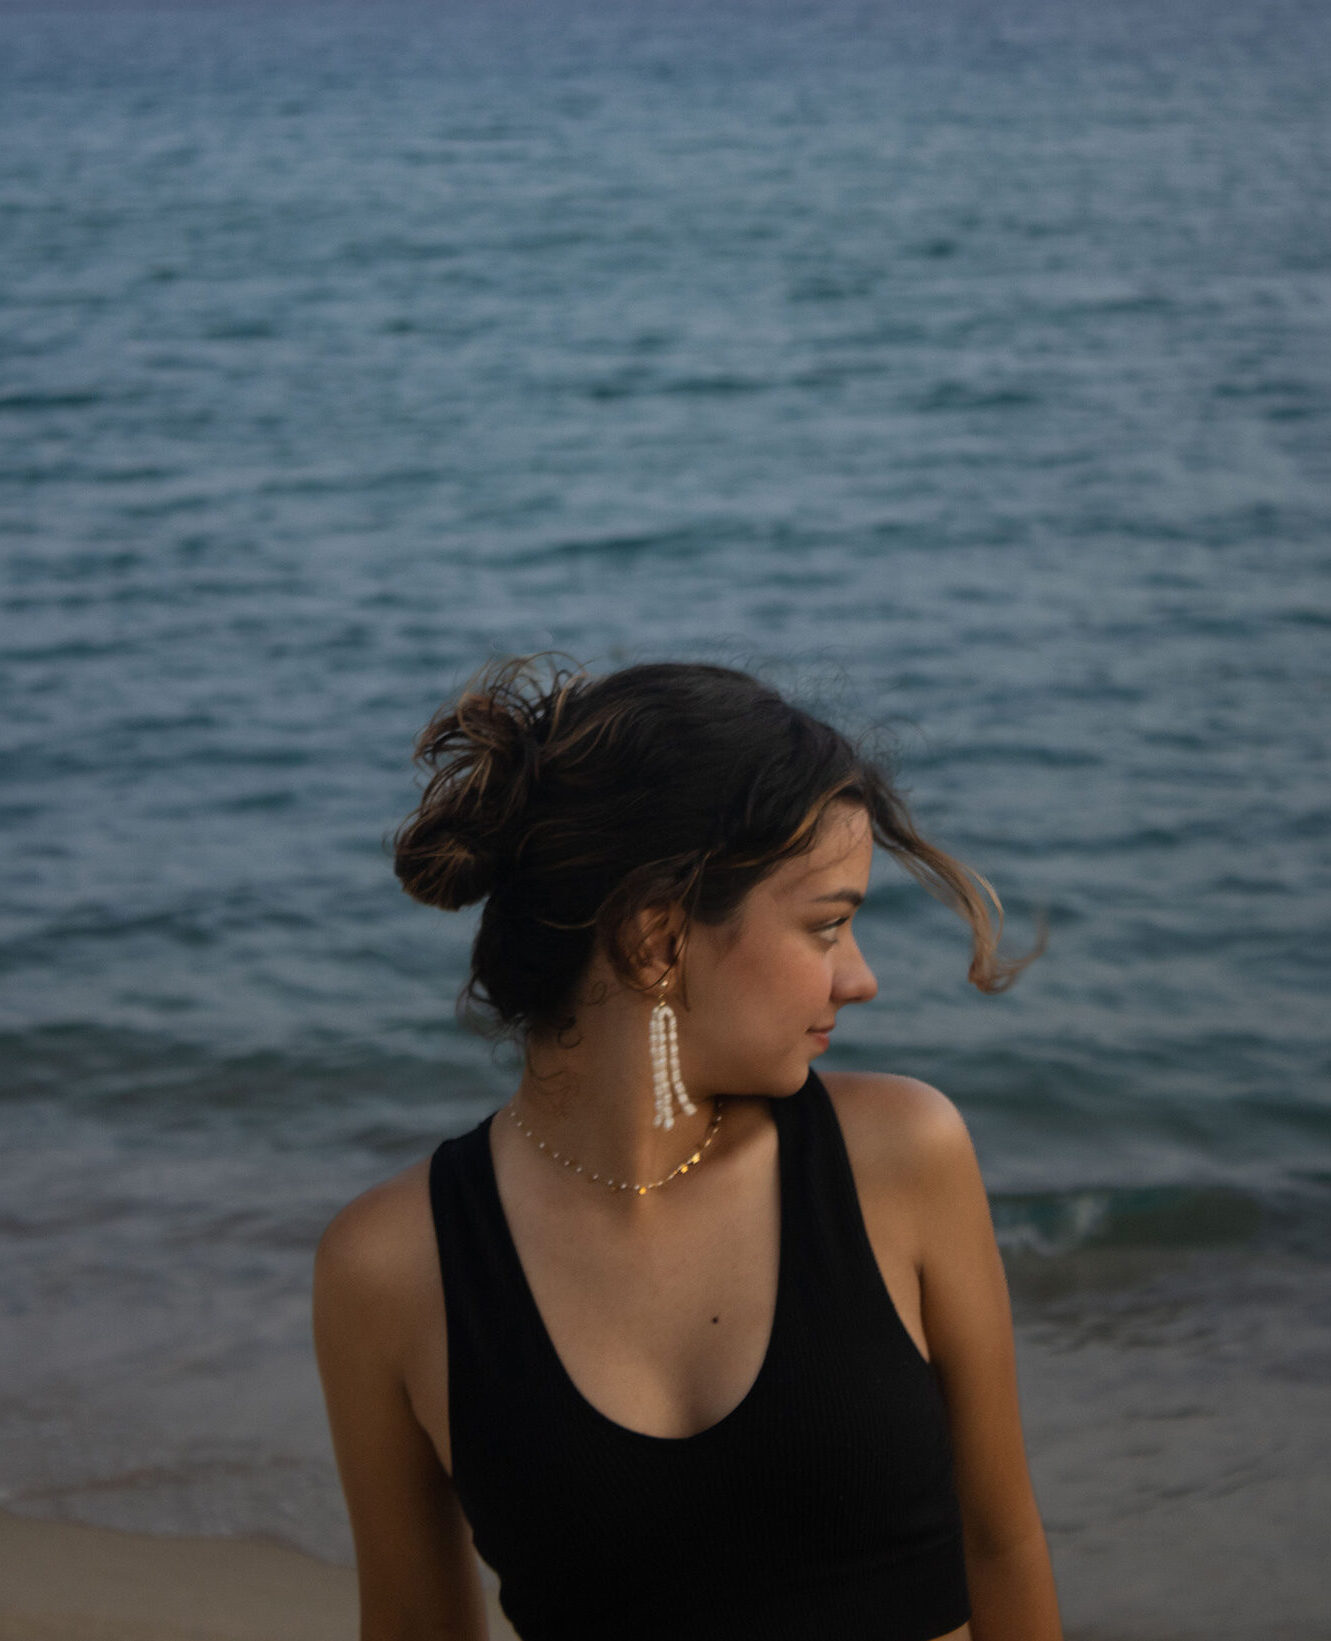 A teen girl in black top and pearl earrings stands at the edge of the water at a sandy beach as window blows through her hair.